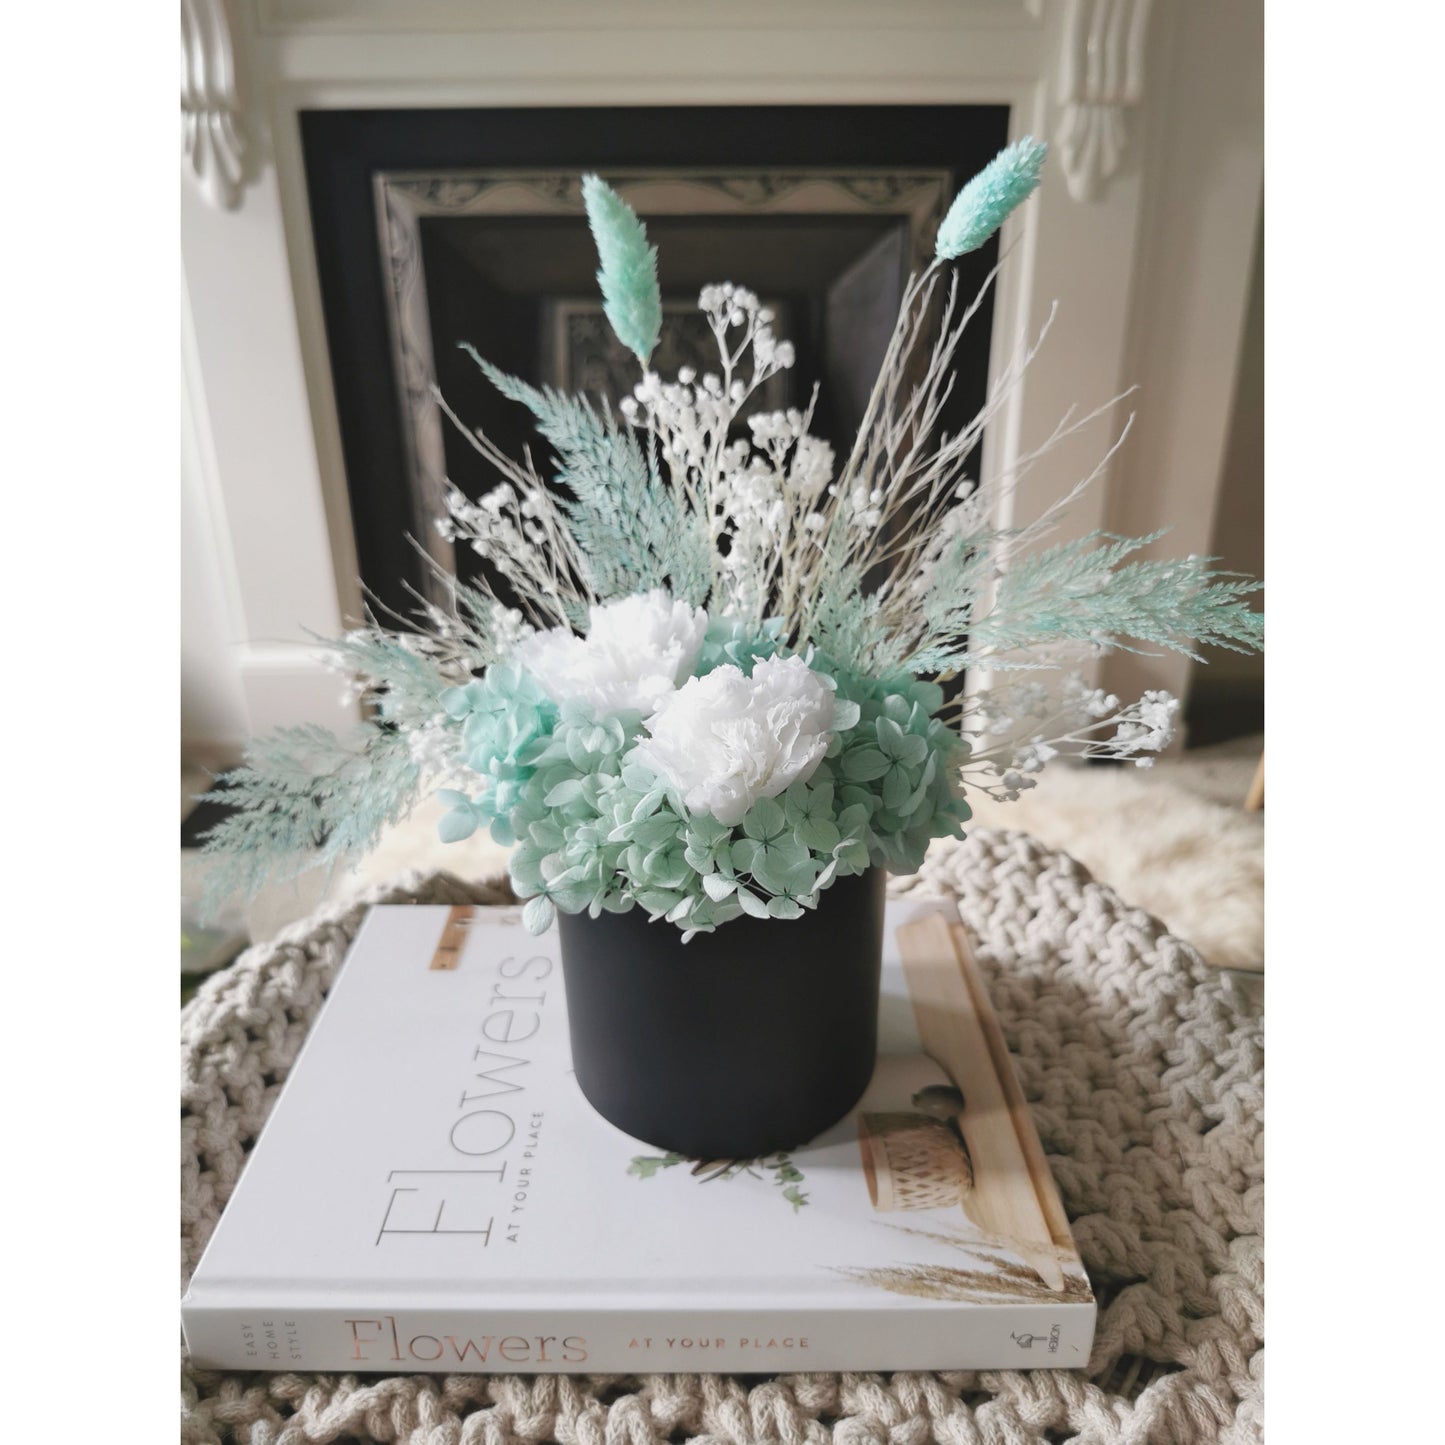 Dried & Preserved flower arrangement in Tiffany Blue & White colours and set in to a black pot. Photo shows arrangement sitting on a book on a coffee table with a fireplace in the background